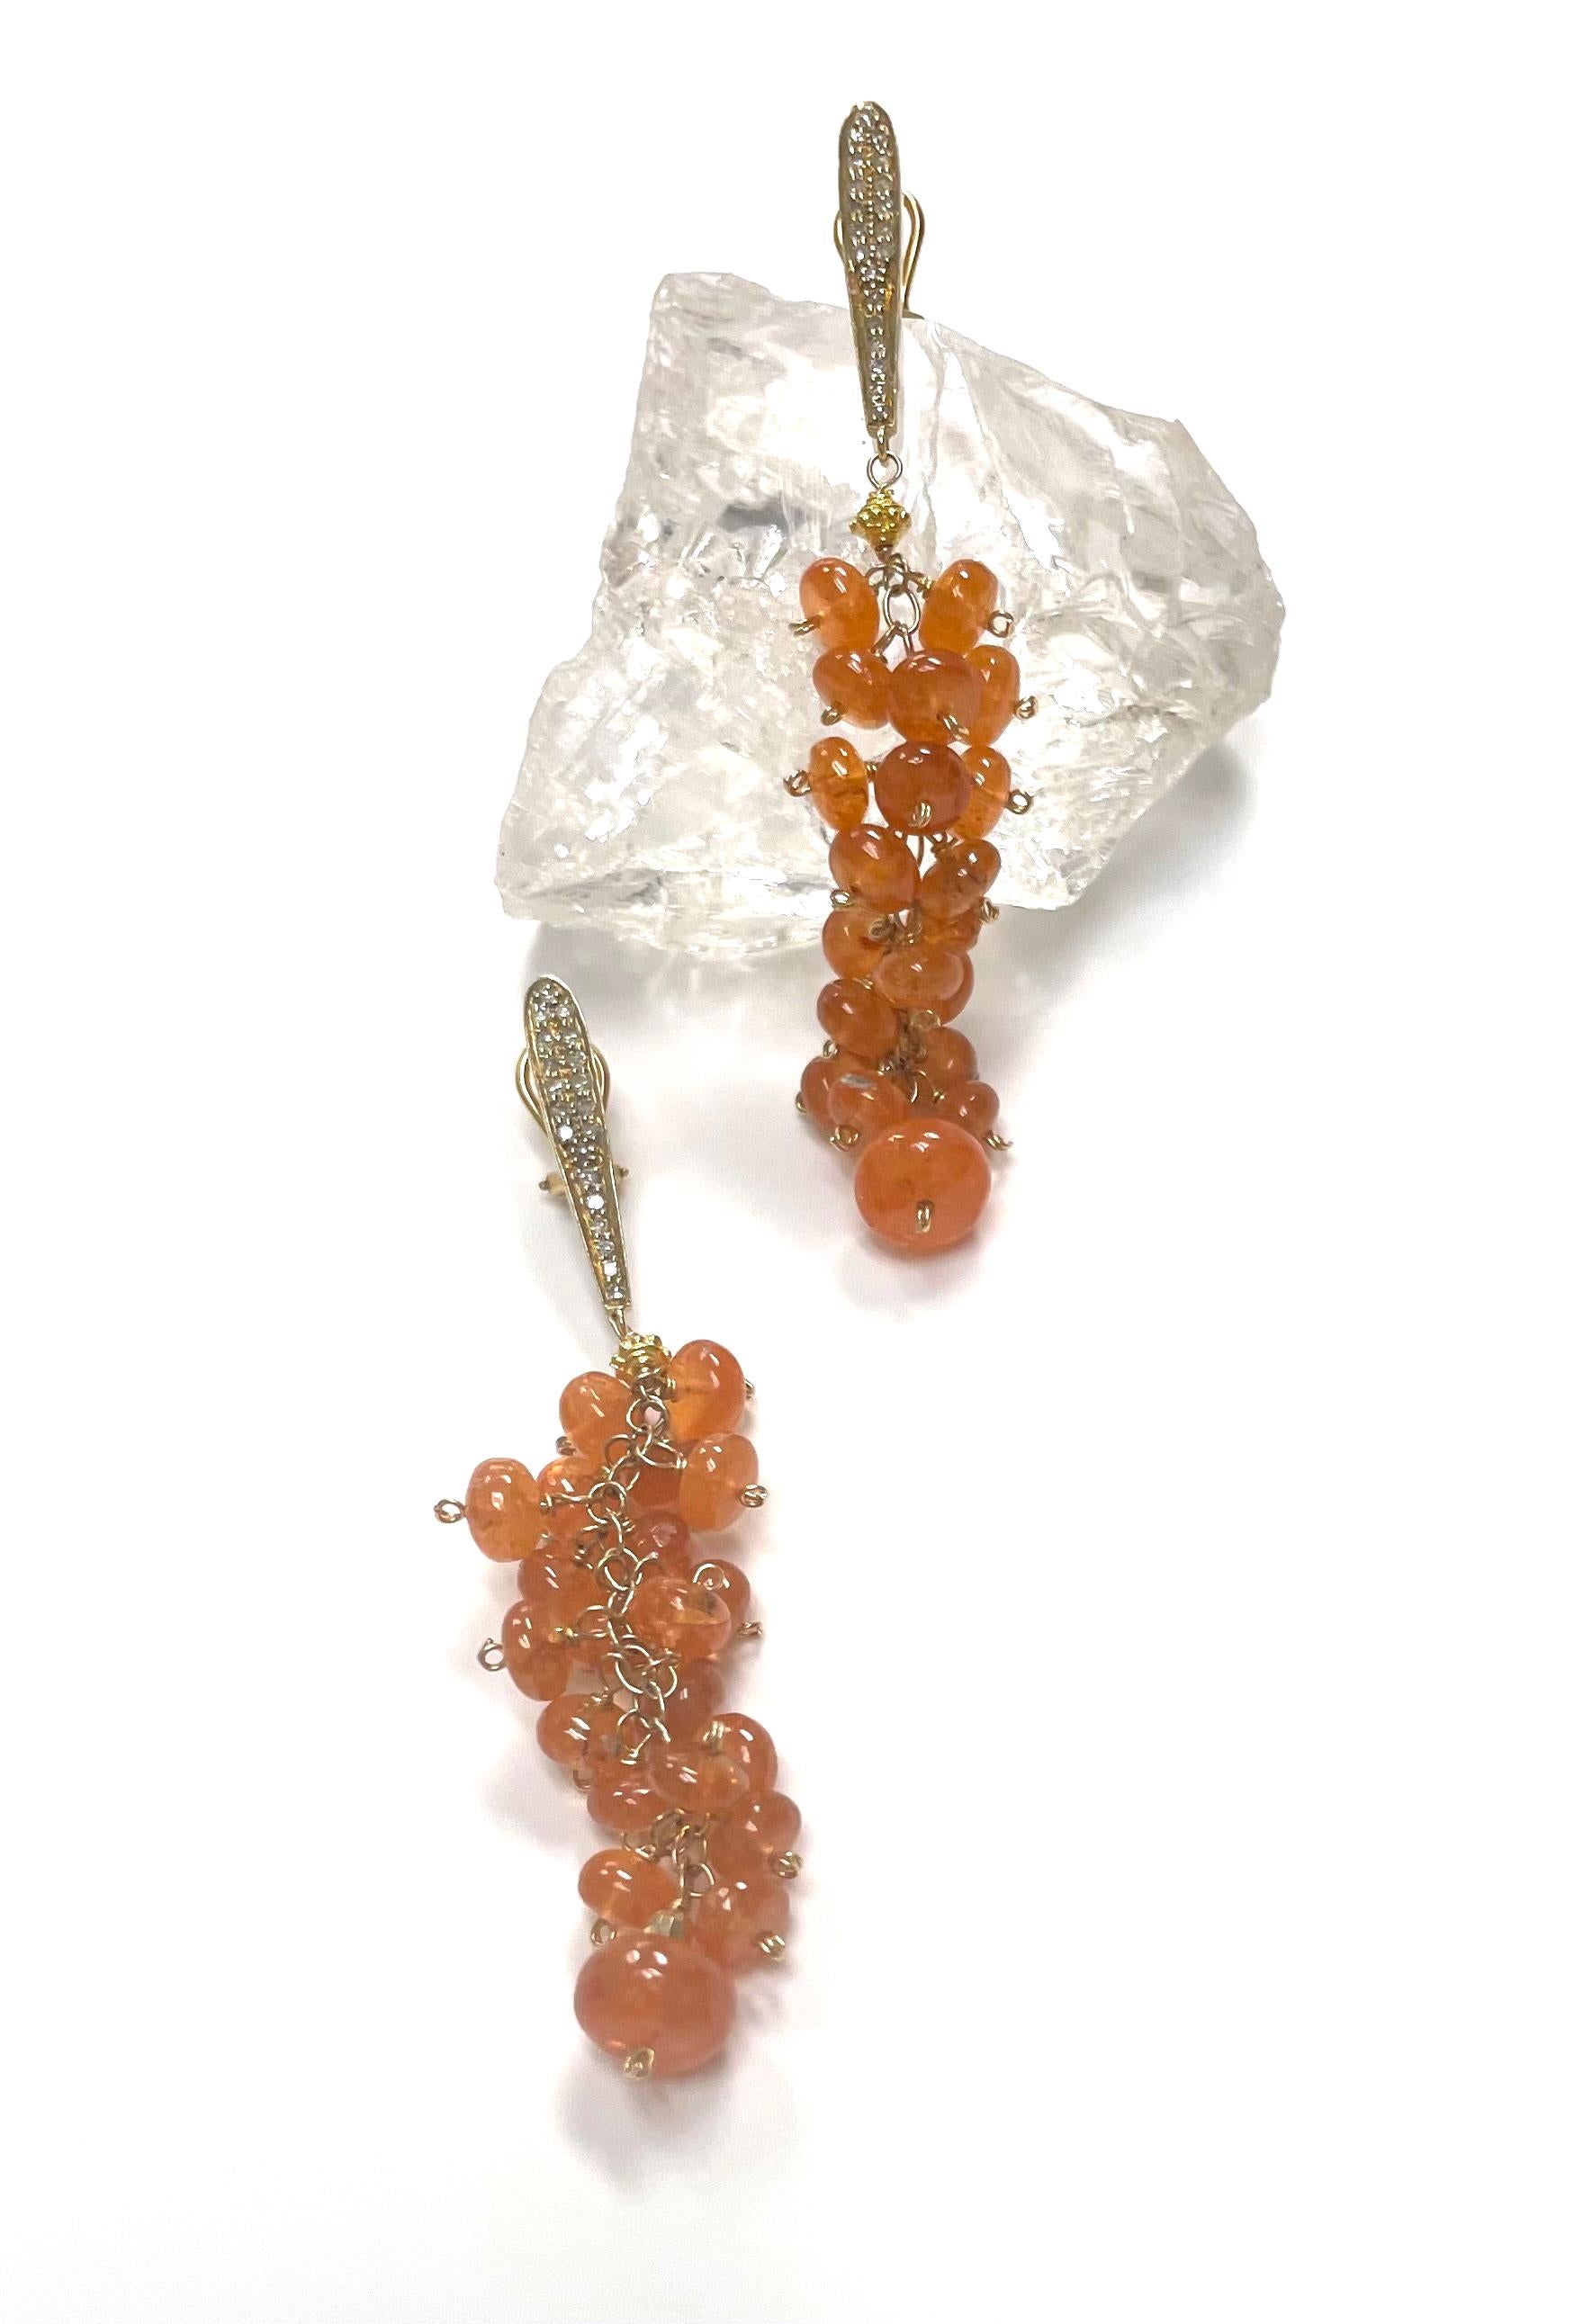 92 Carats Orange Spessartite with Gold and Diamonds Cluster Earrings In New Condition For Sale In Laguna Beach, CA